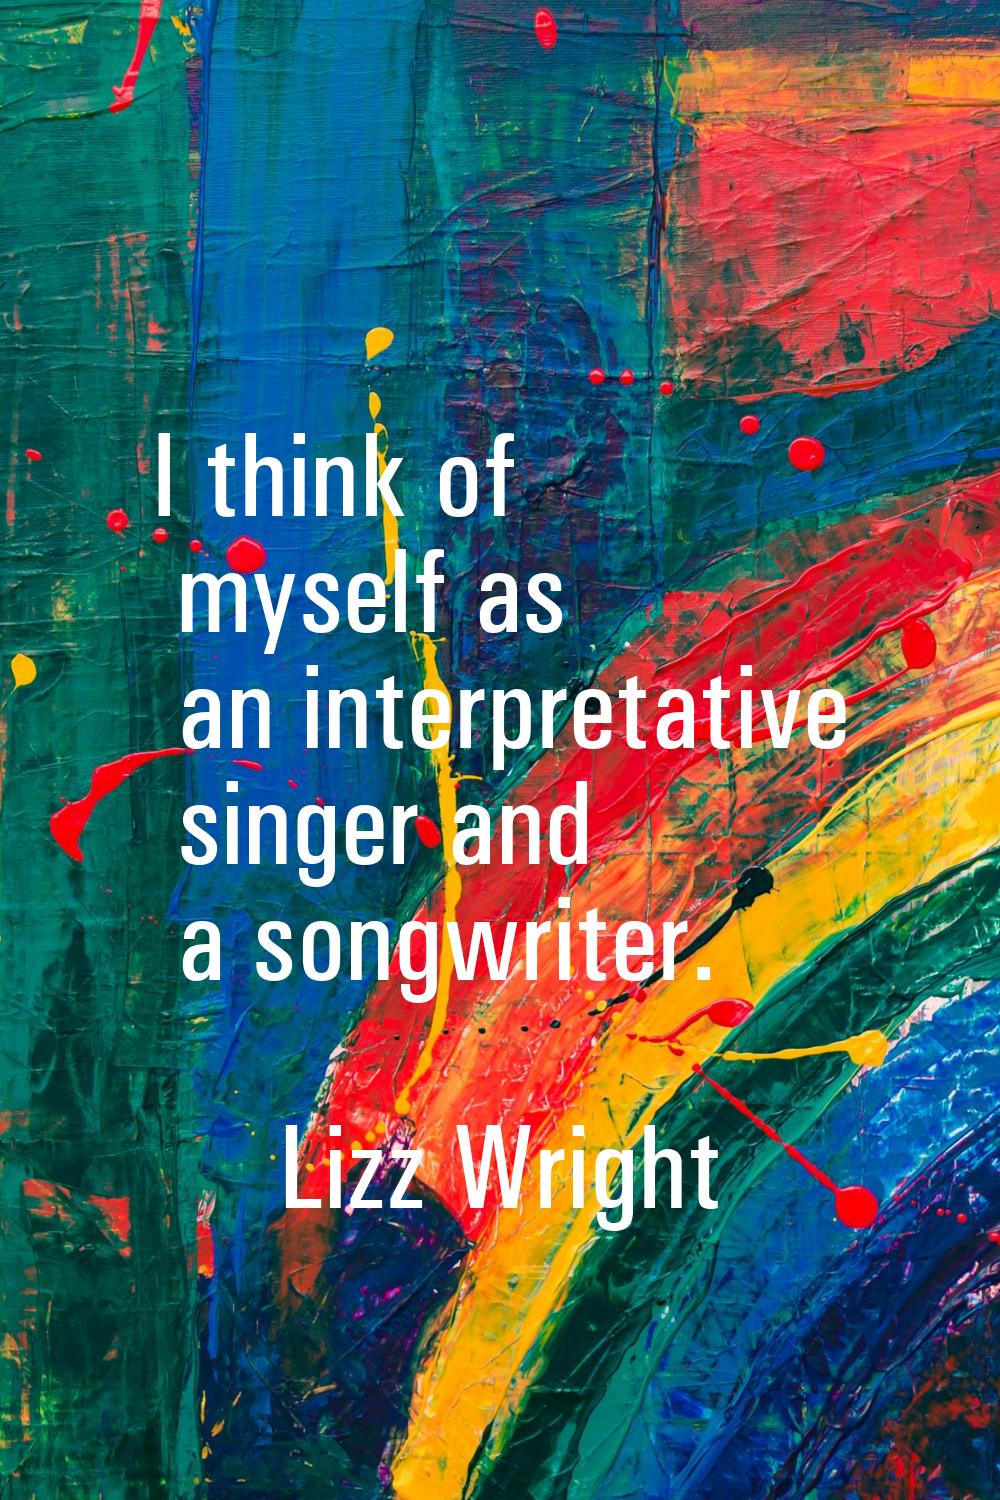 I think of myself as an interpretative singer and a songwriter.